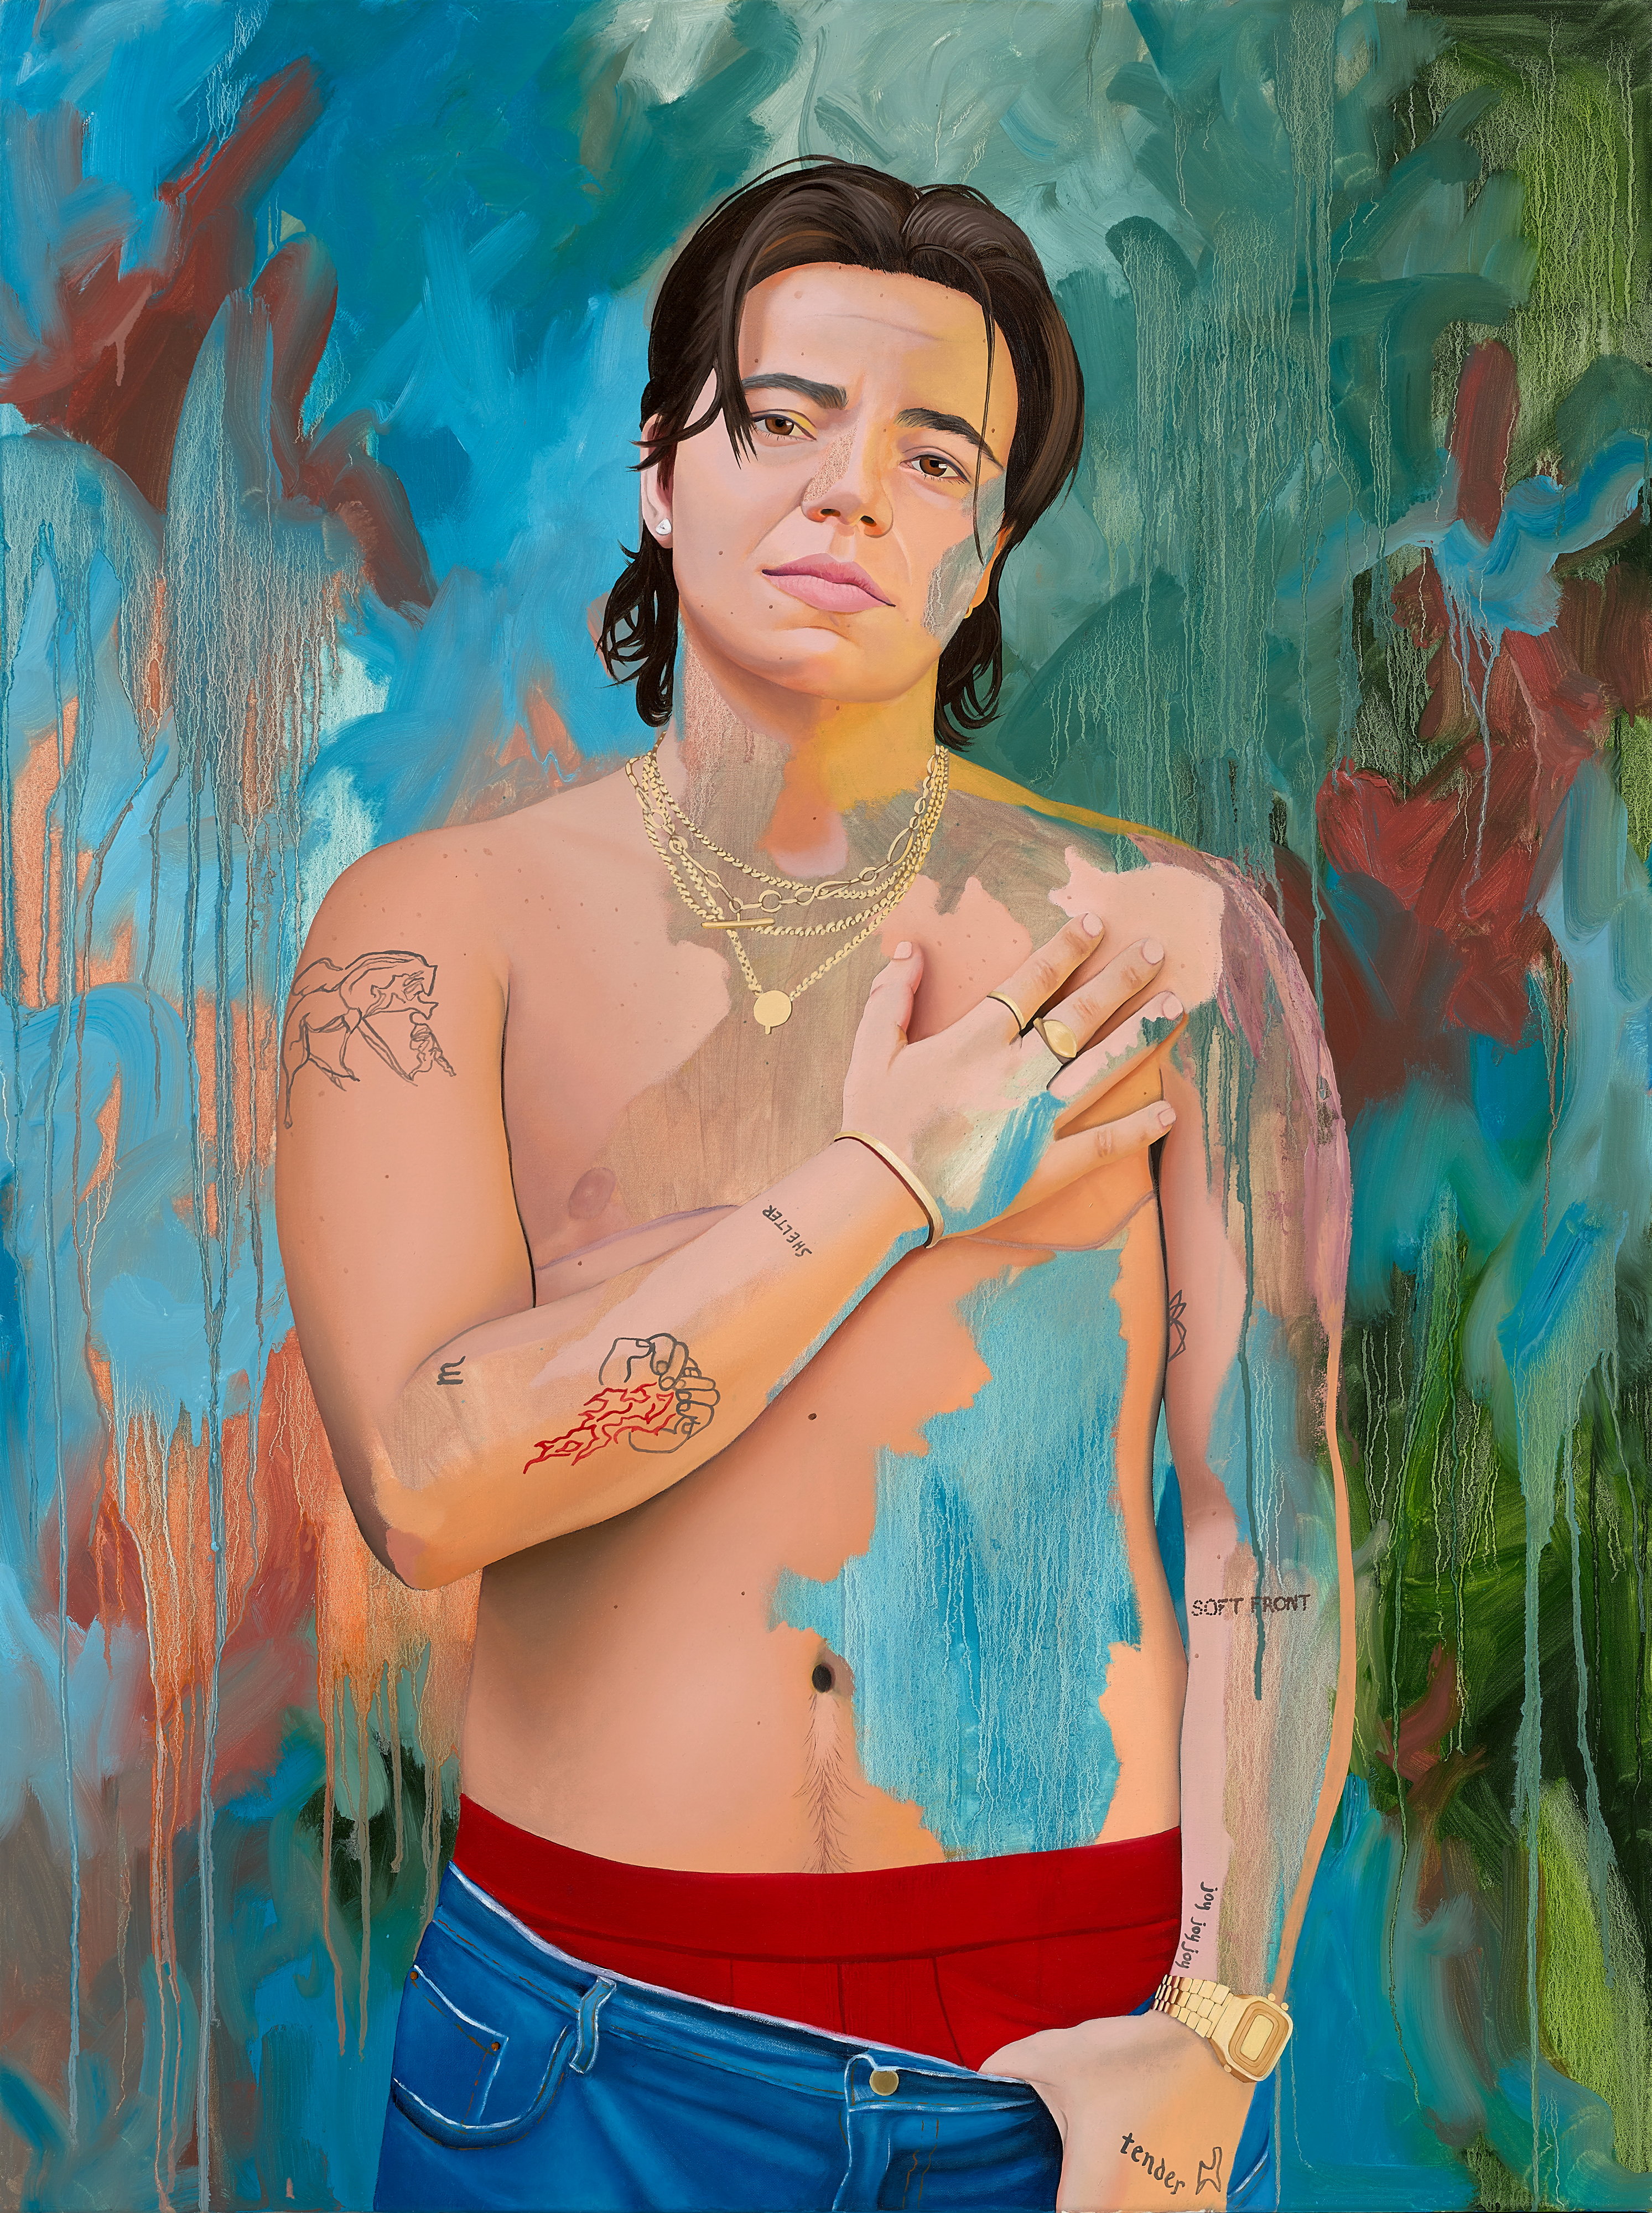 A colourful oil painting of Zoe Terakes, a non-binary white person with brown hair, who is shirtless and has top surgery scars.